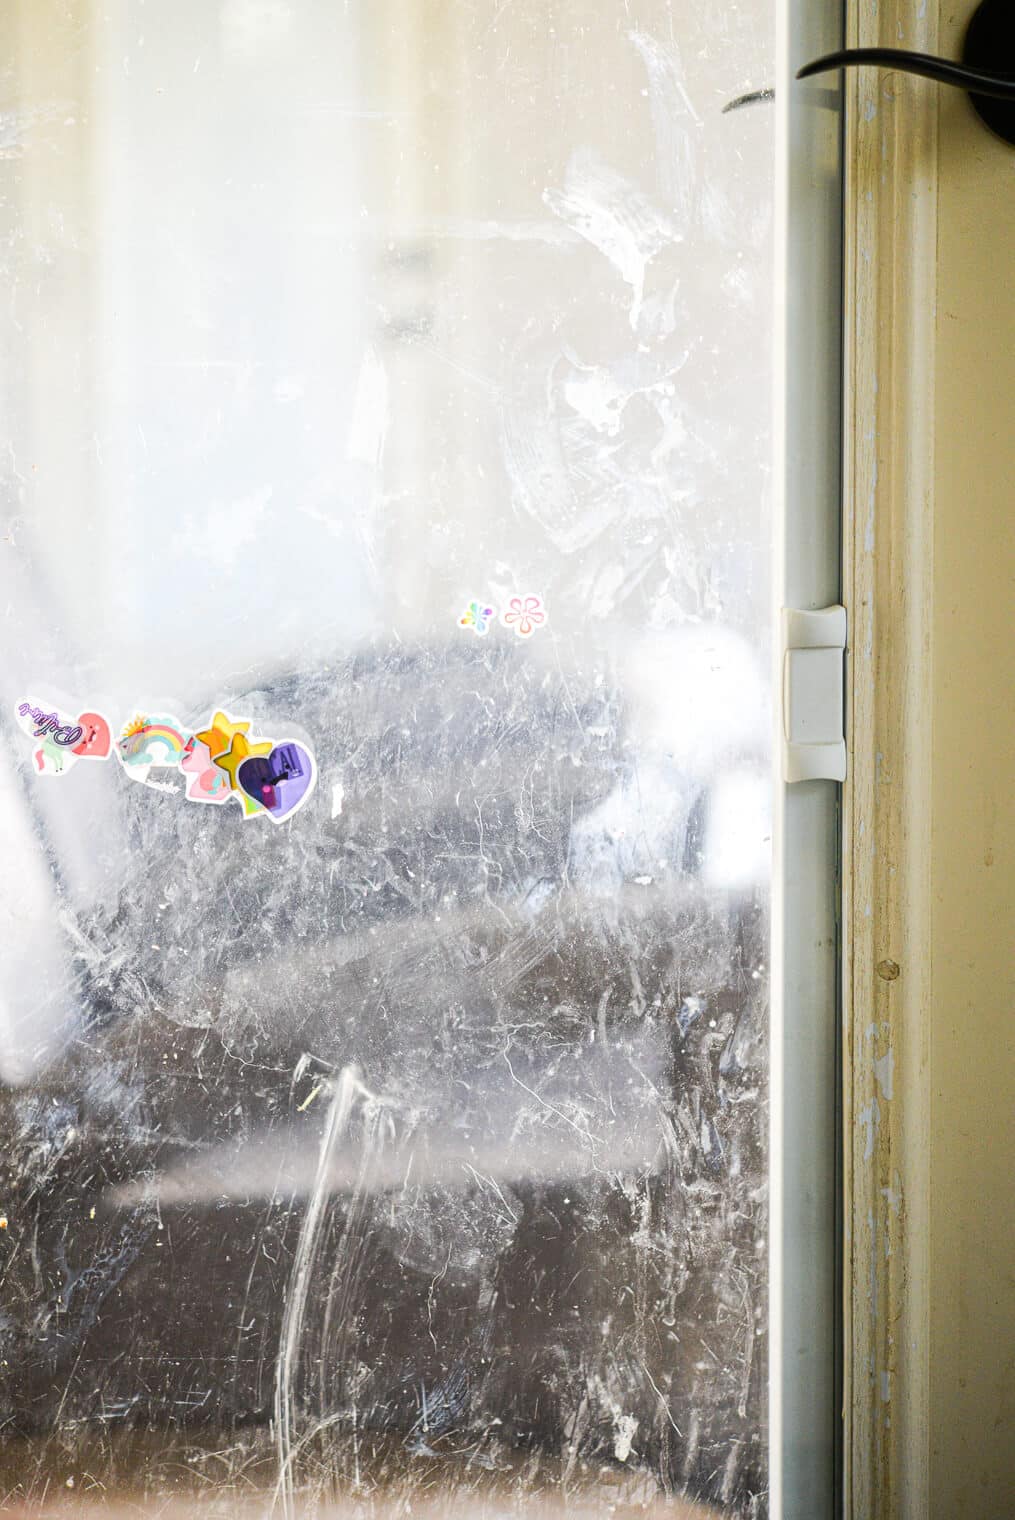 a glass door with stickers and smudges on it